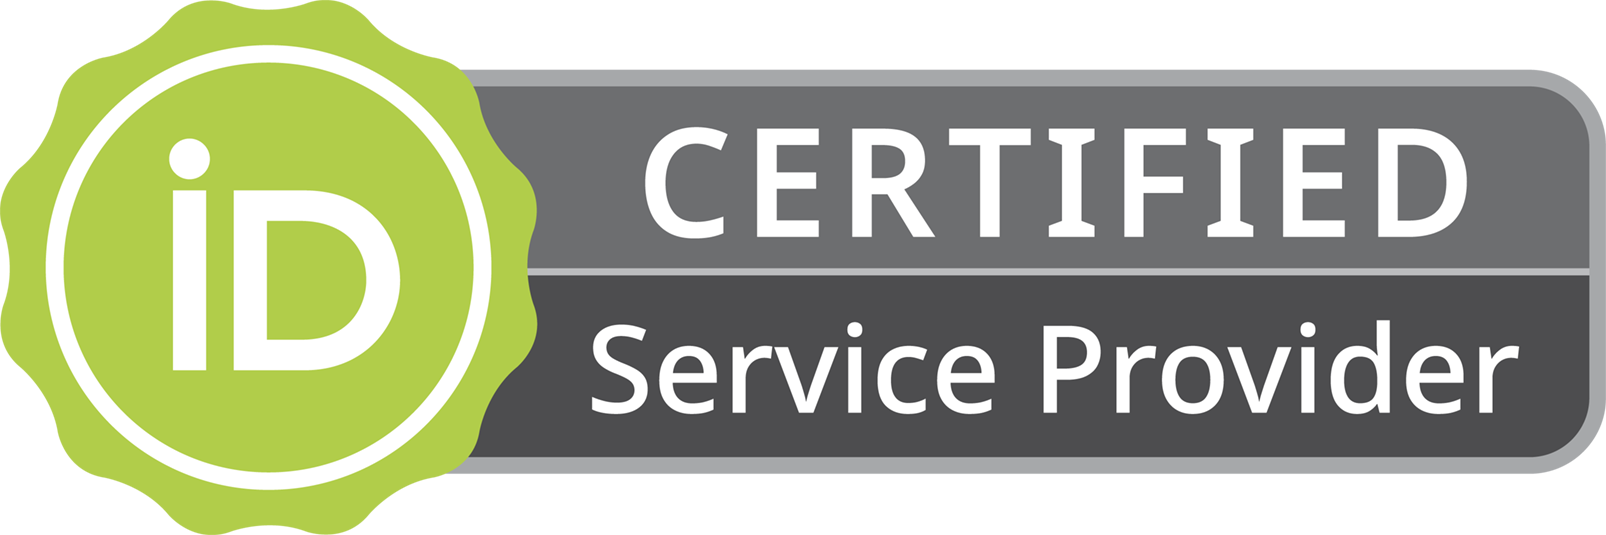 Certified ORCID Service Provider